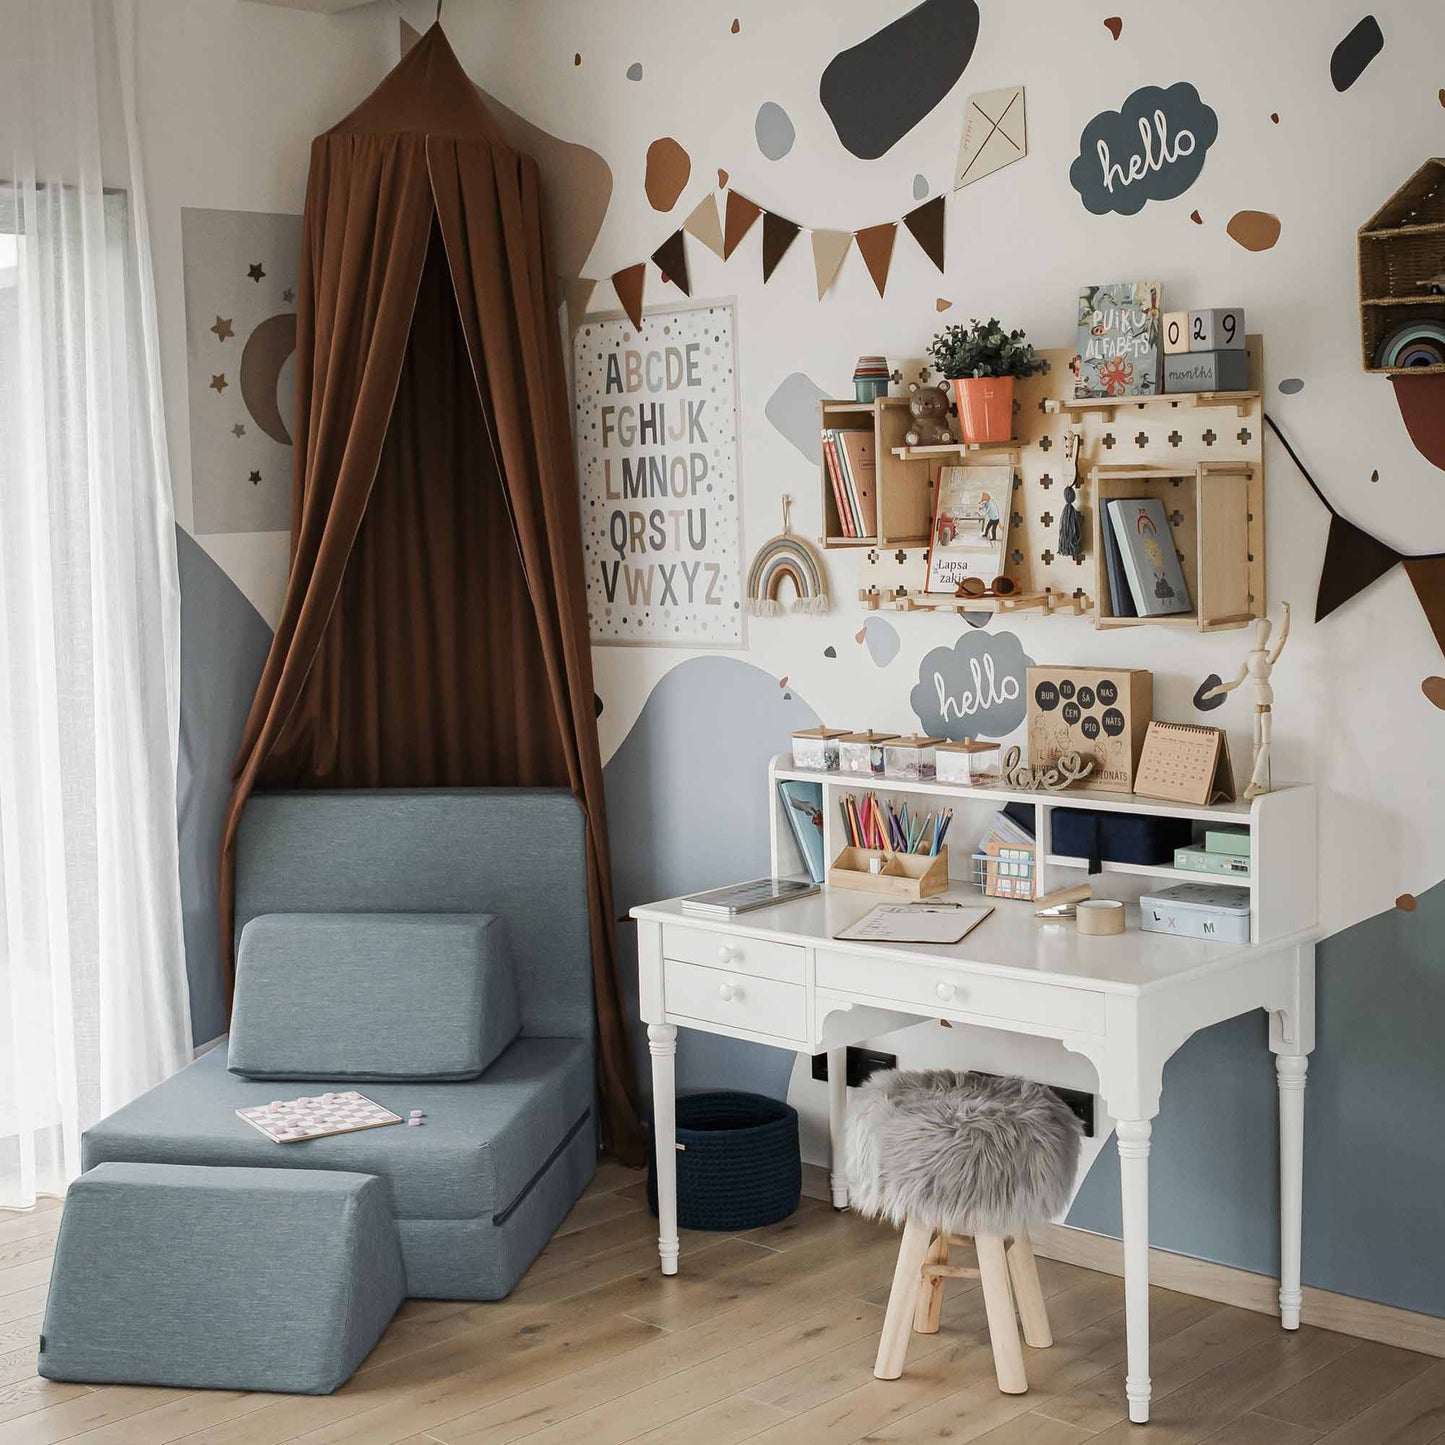 A children's playroom features a reading nook with a brown canopy, a versatile pedestal desk with organized stationery and adjustable leg height, wall decorations, alphabet art, and a table with a hutch filled with toys and books.